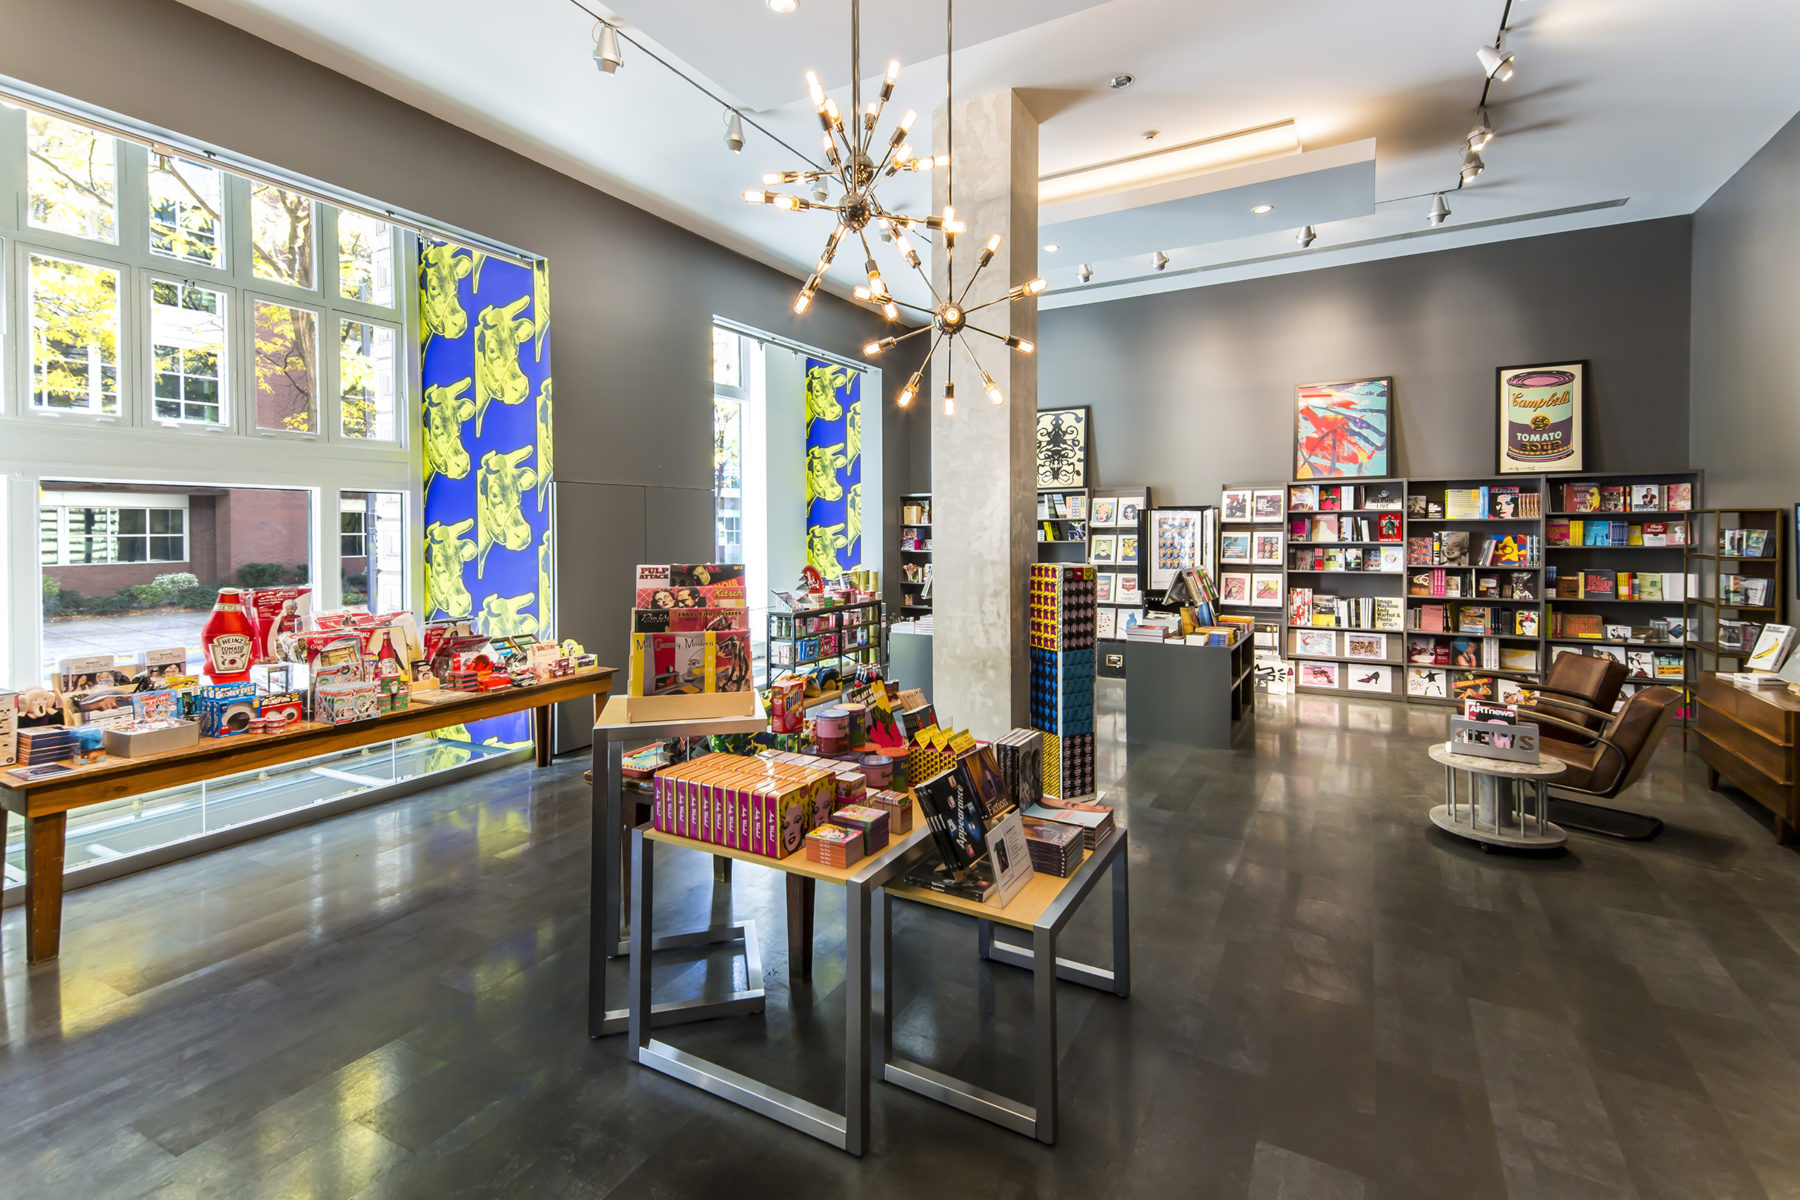 A photograph of the Warhol store. The far wall is occupied by book shelves, and there is a table full of products pushed against the windows overlooking the street on the left side of the photo. Another display occupies the center of the image, under three hanging wheel-like light fixtures.